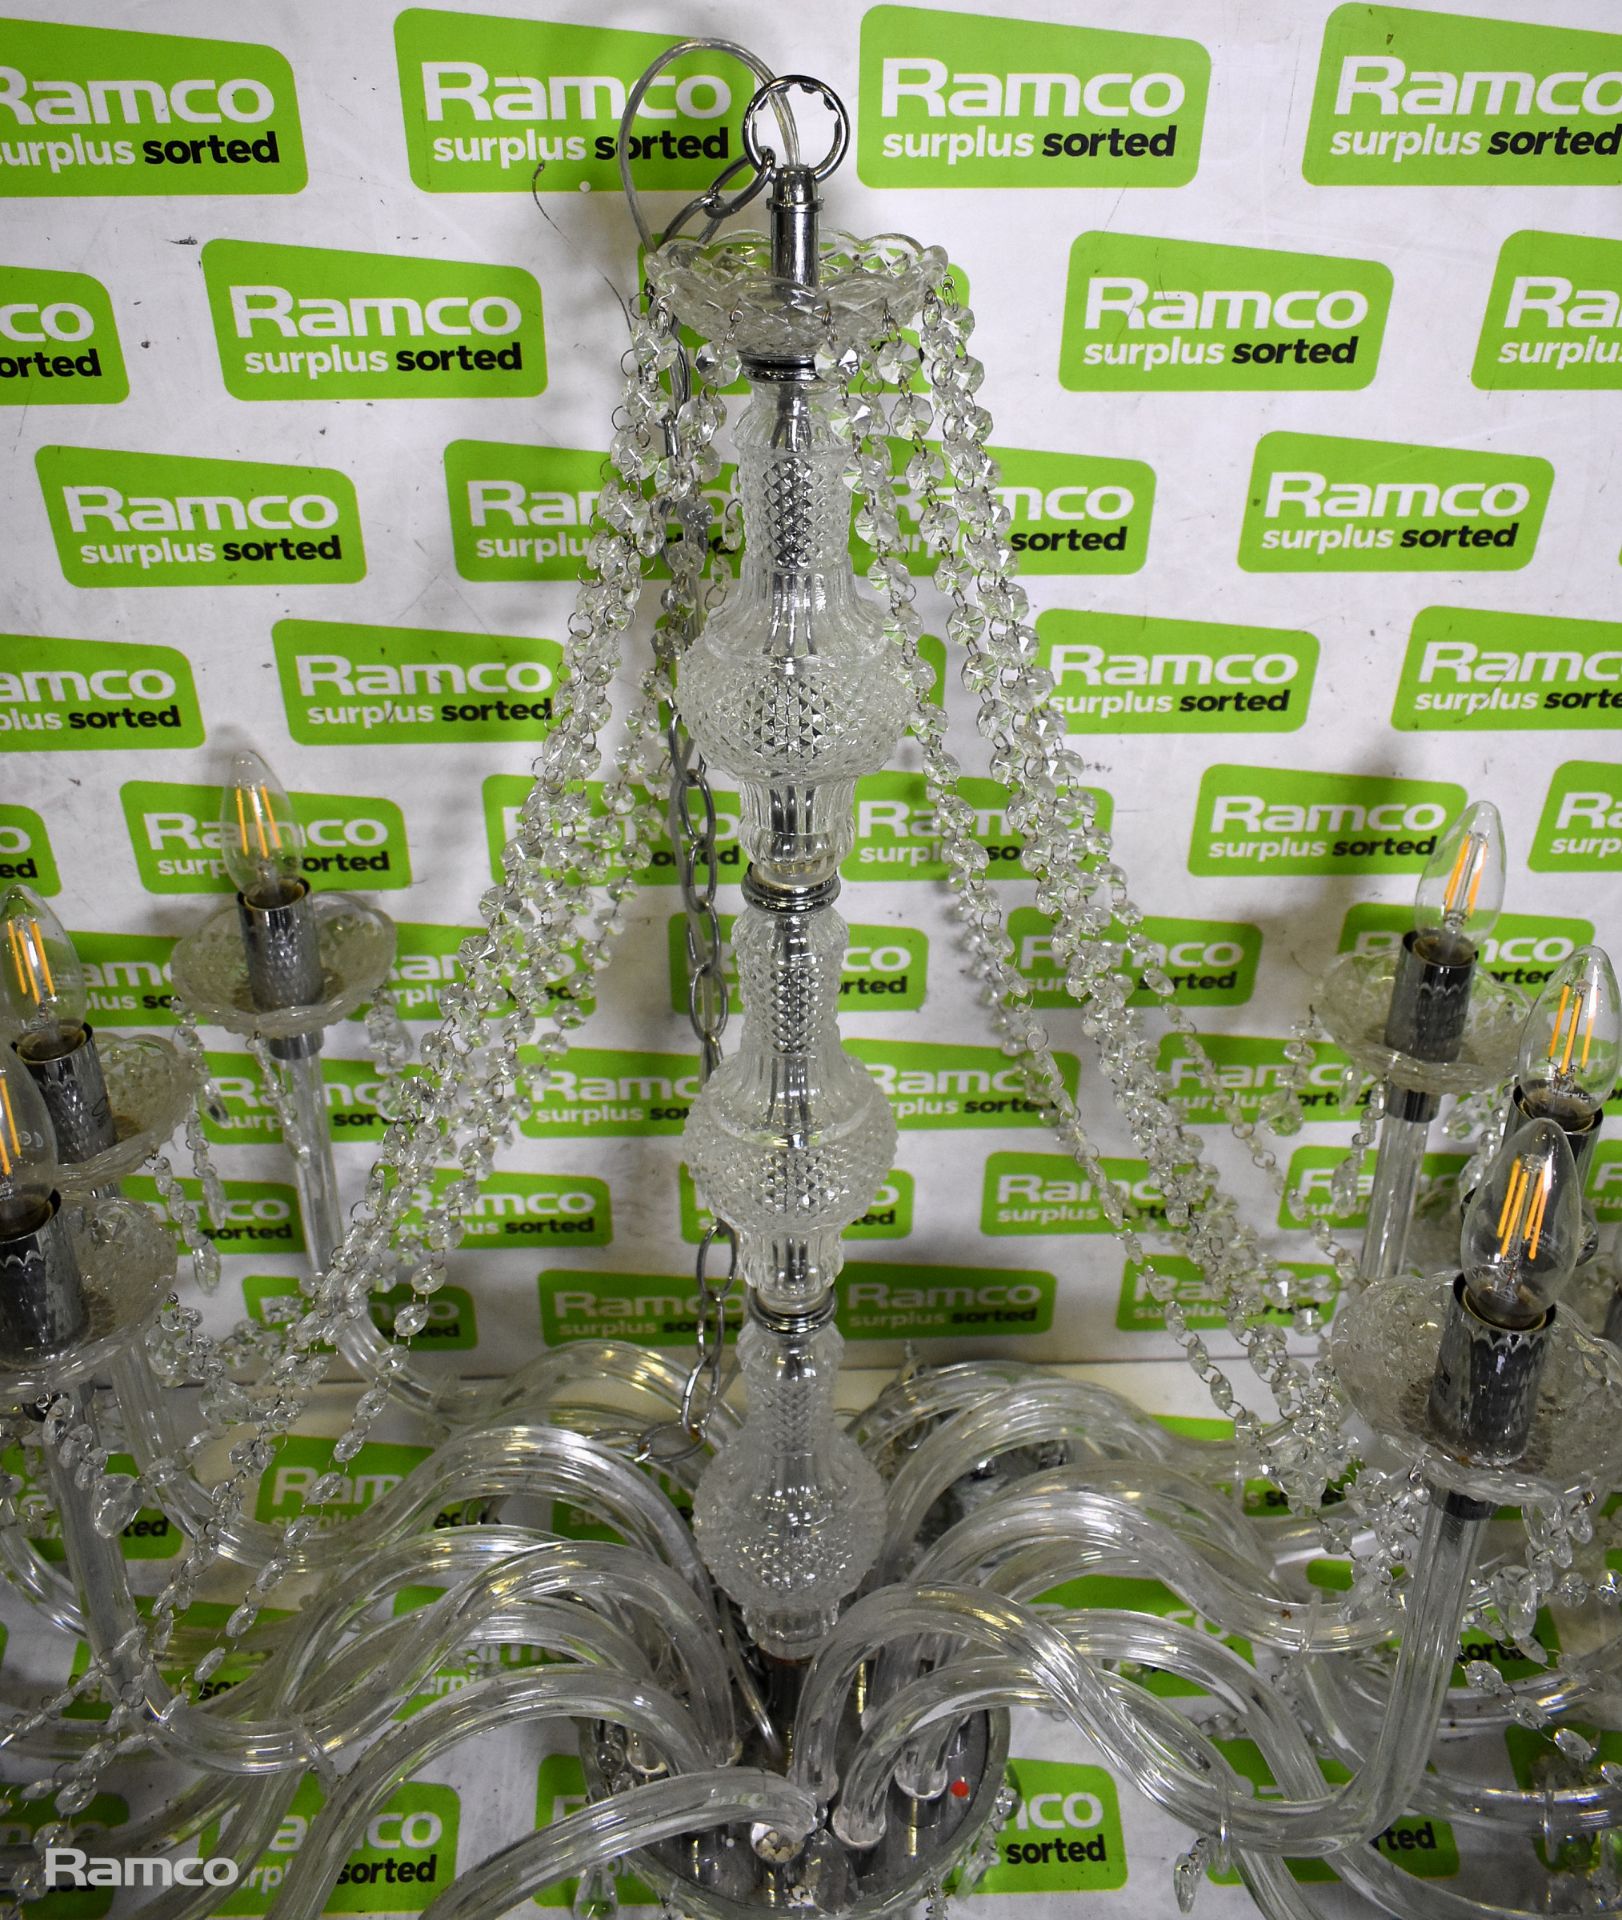 Katie 18lt Chandelier - polished chrome finish clear acrylic droppers and beads - 18 x 40W - Image 4 of 7